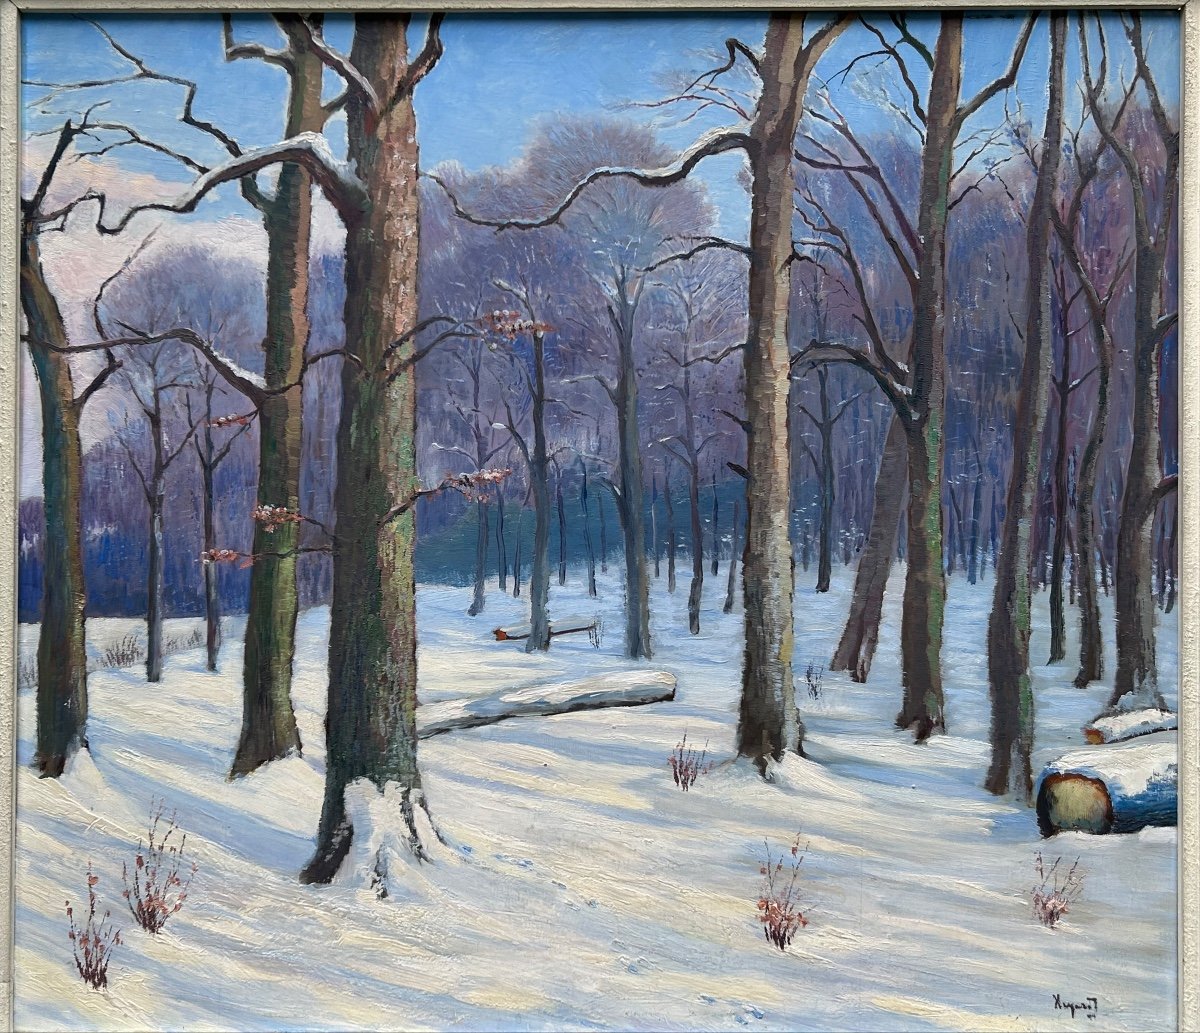 Tableau paysage d’hiver luxembourgeois, signature illisible 